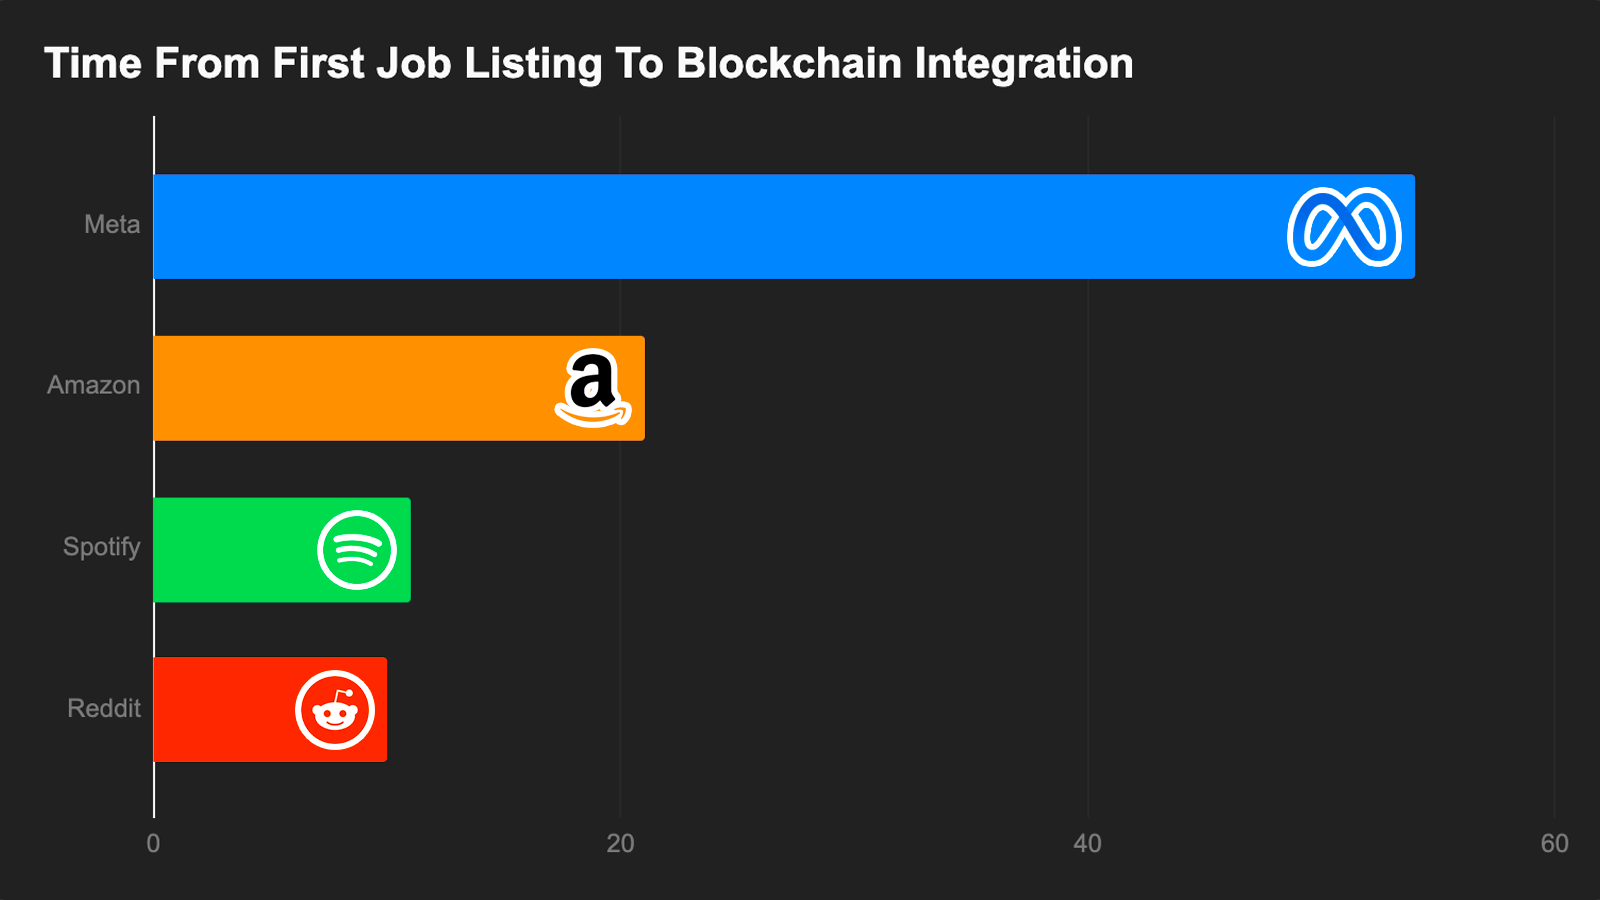 Time From First Job Listing To Blockchain Integration, in Months